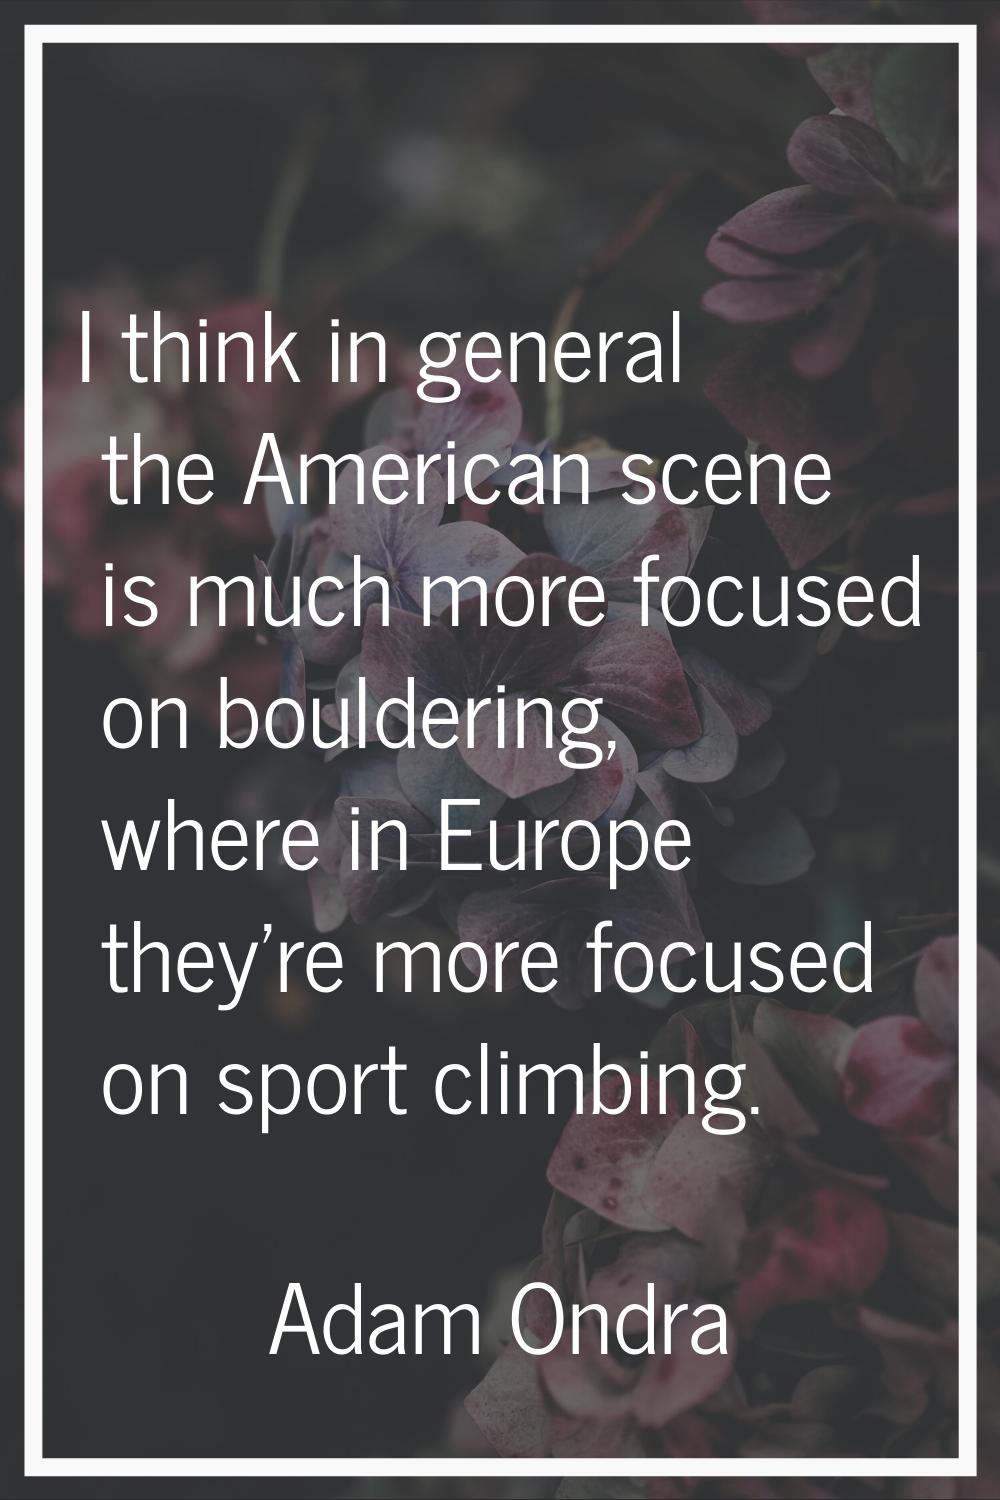 I think in general the American scene is much more focused on bouldering, where in Europe they're m